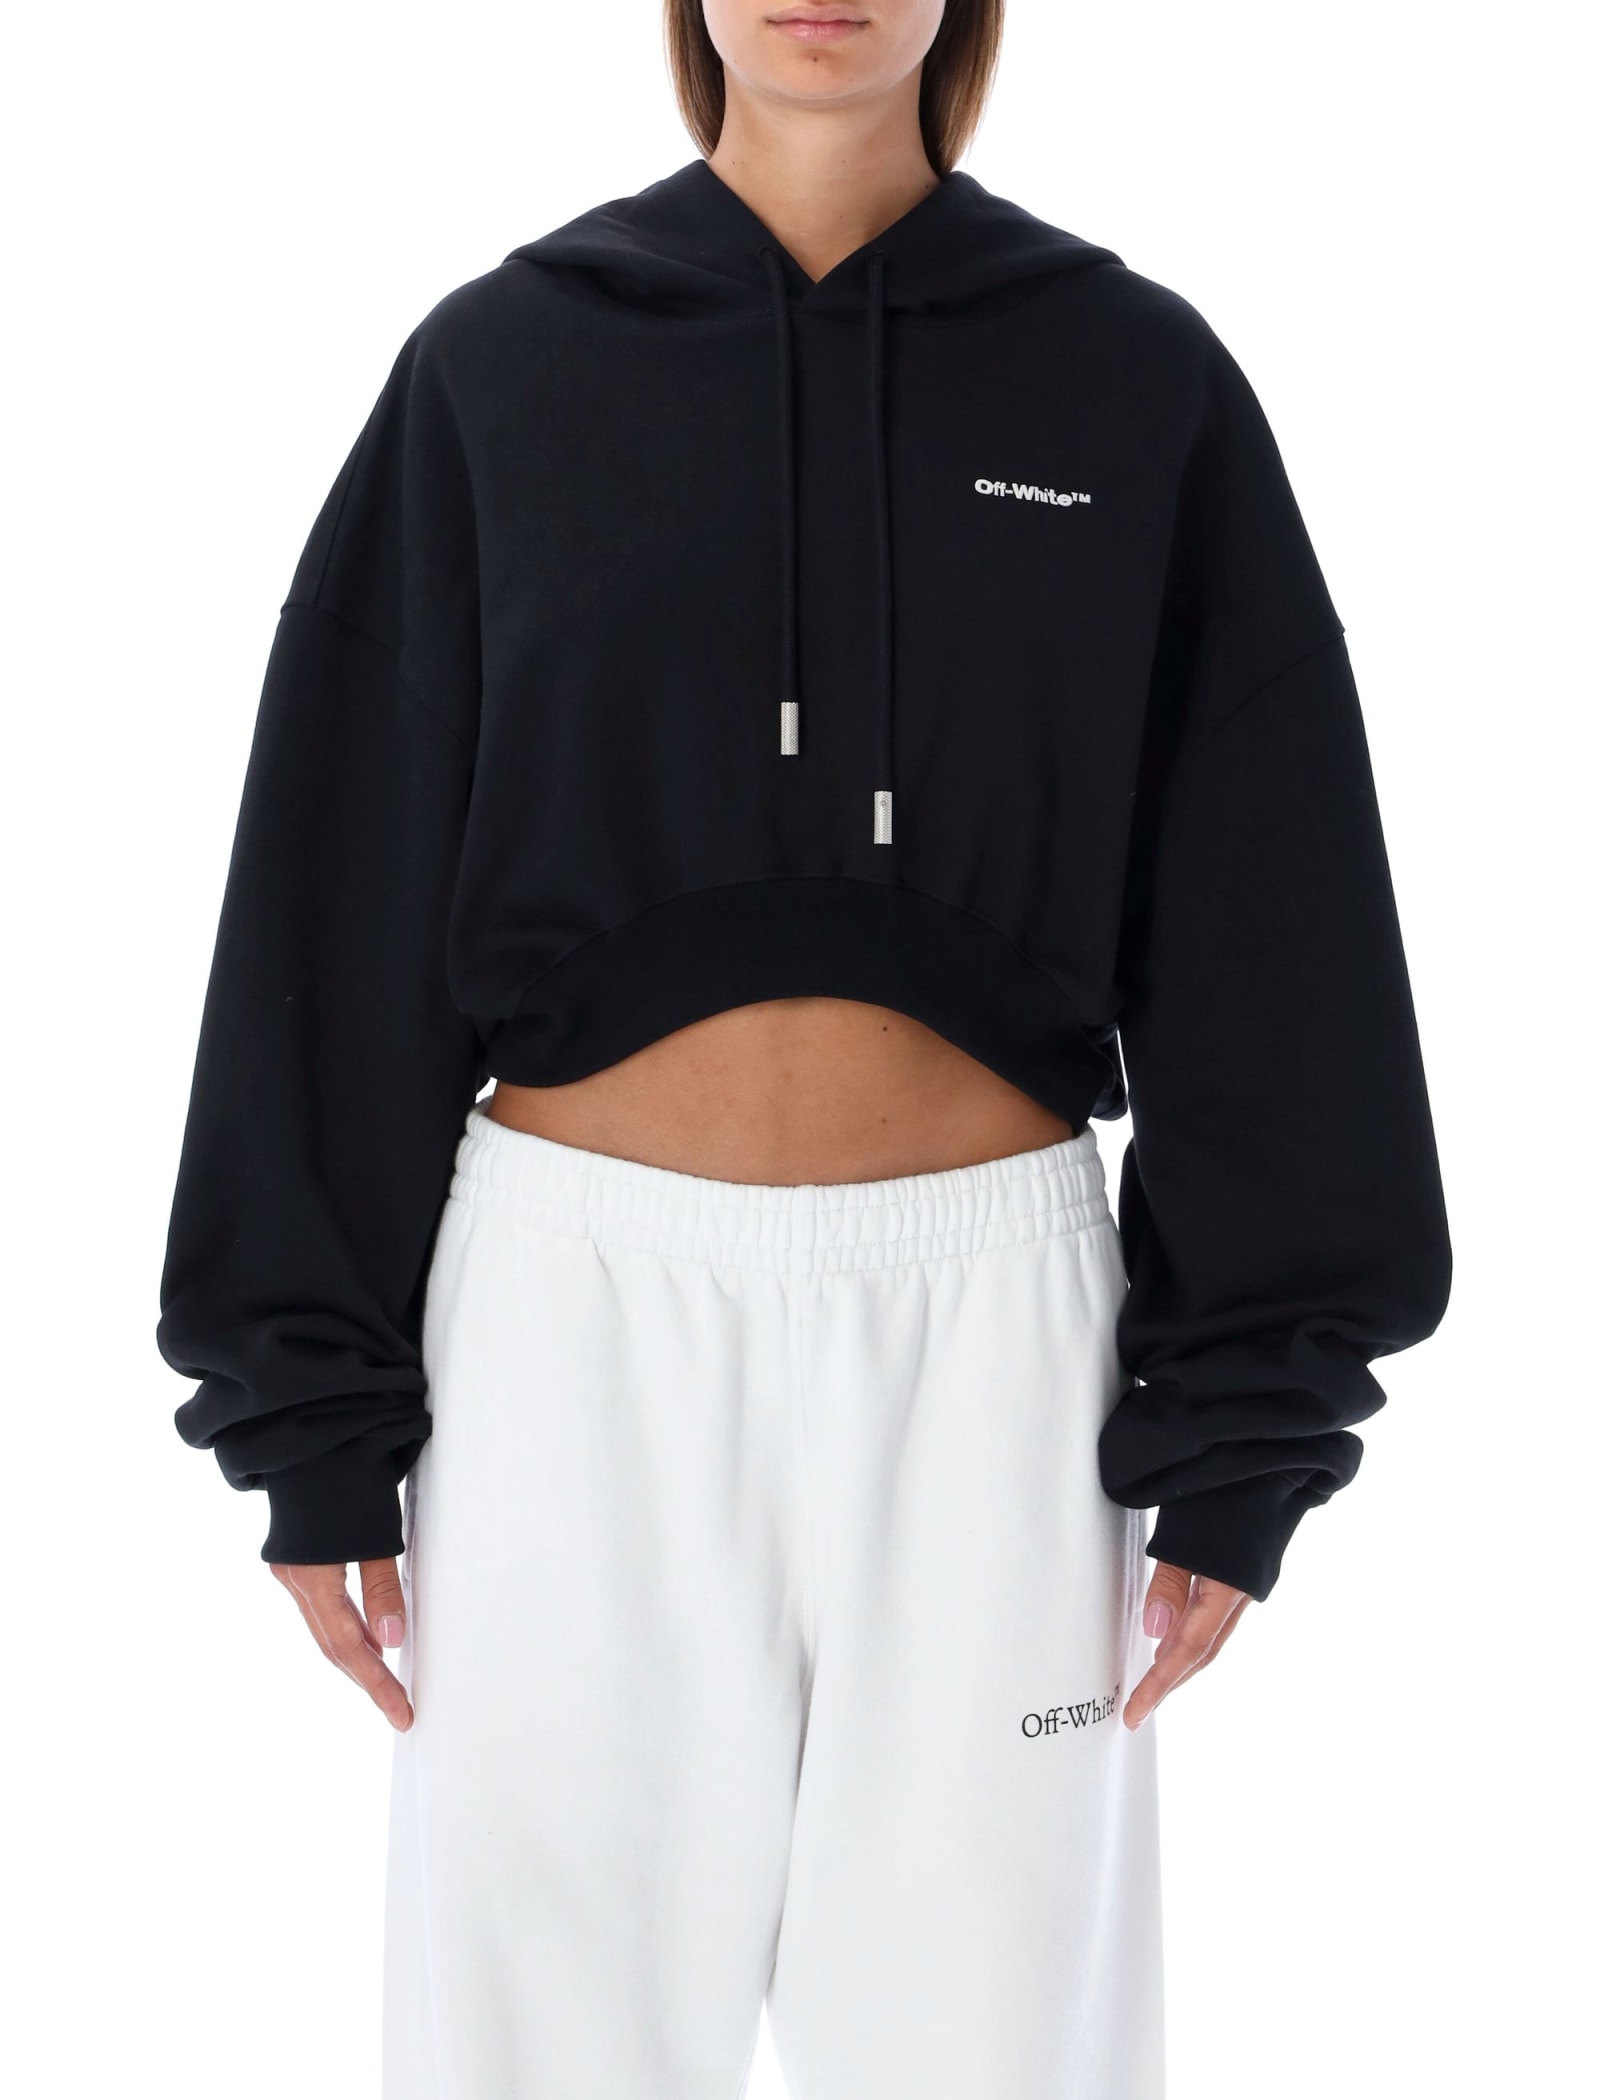 Off-White For All Crop Hoodie